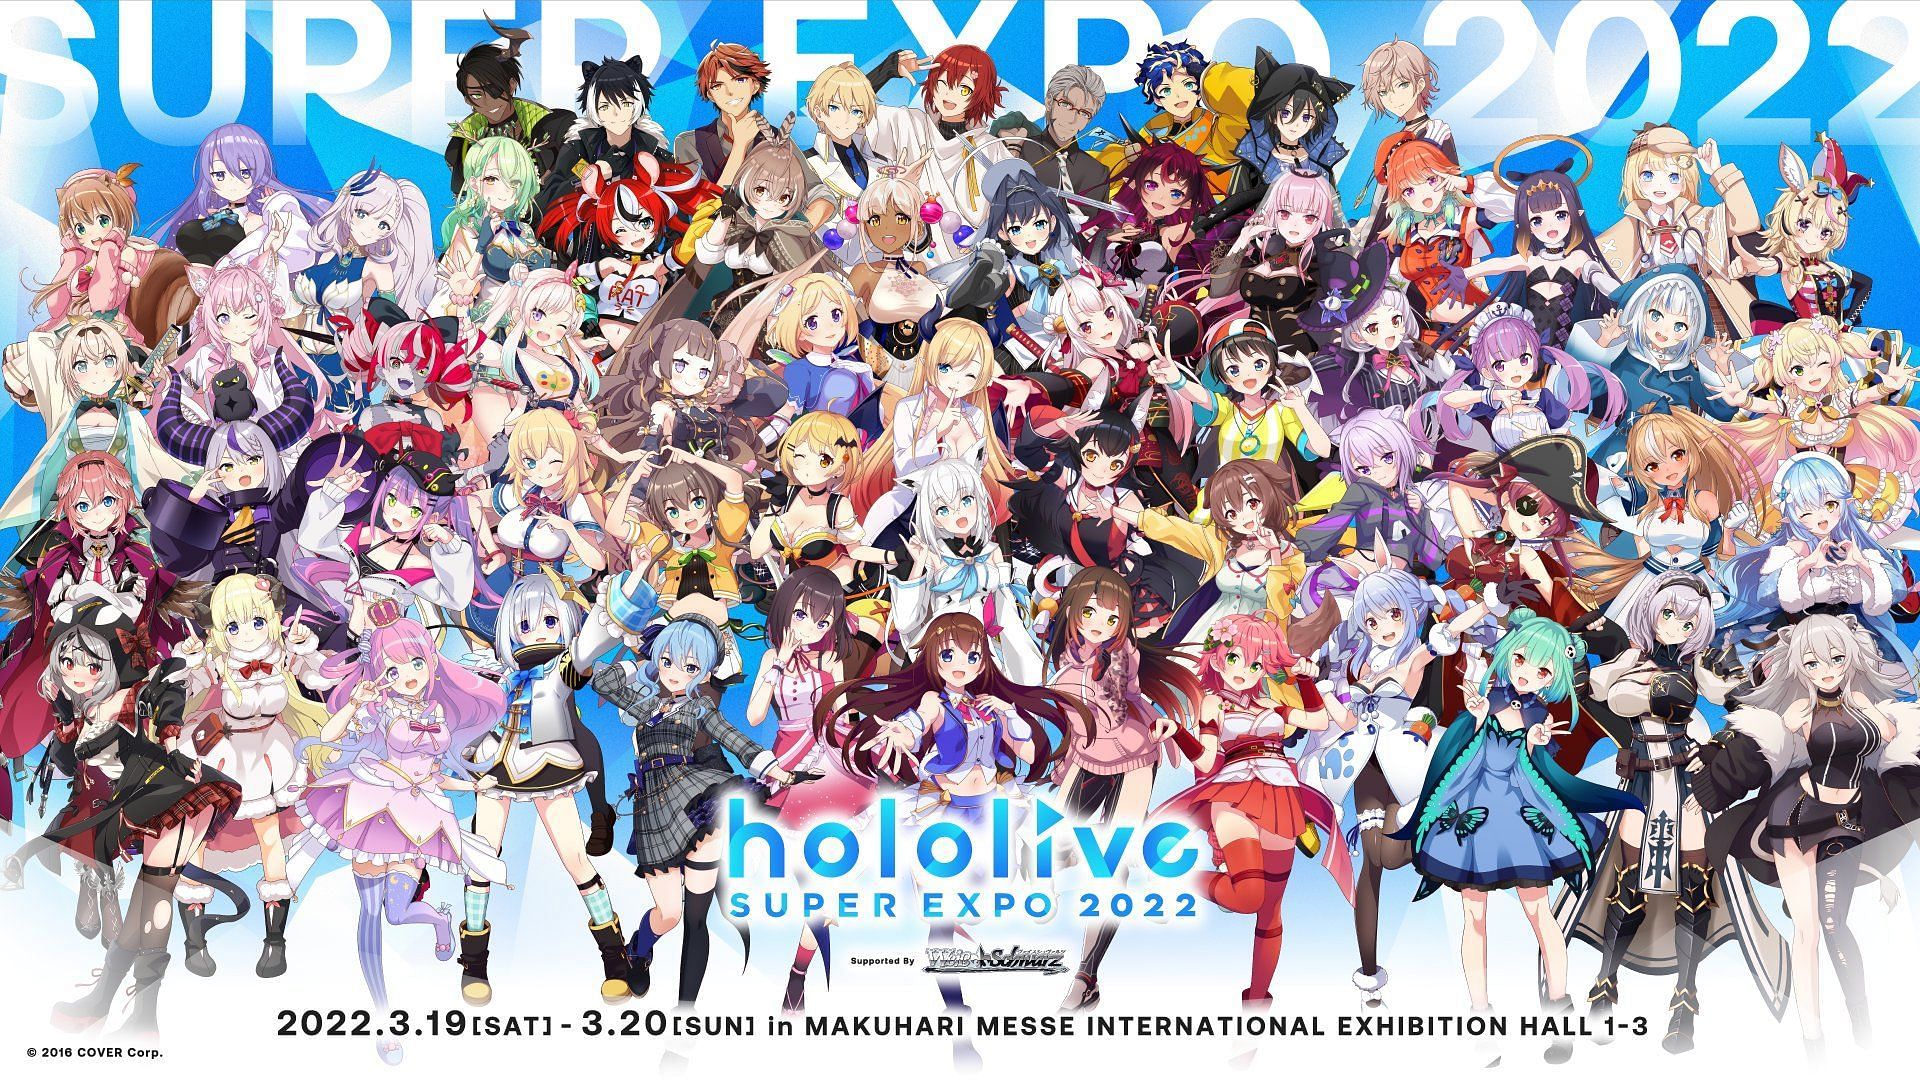 Promotional material for the hololive Super Expo 2022 (Image via hololive Official/Twitter)